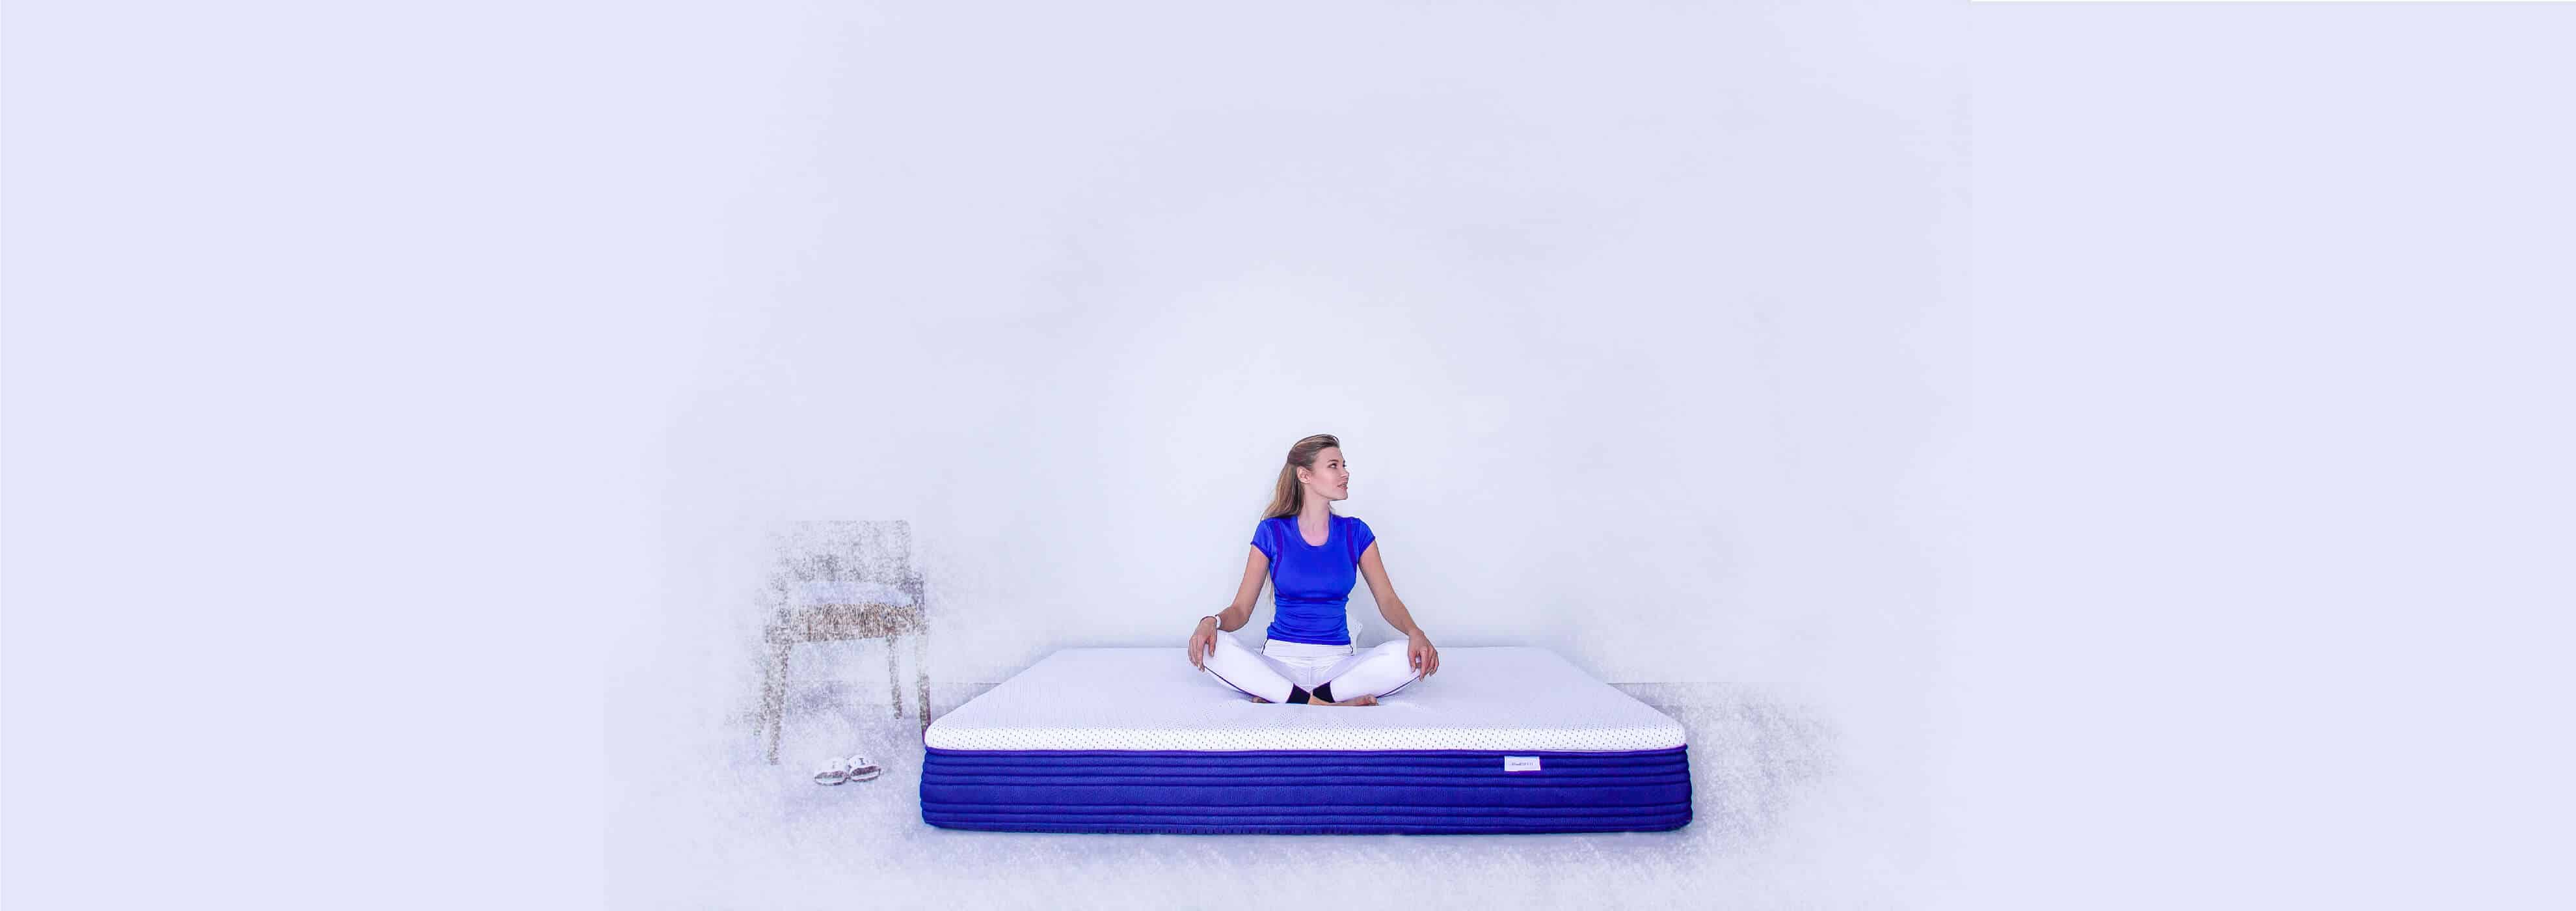 The WHISPER Mattress is made of quantum foam. It cleans itself, keeps cool, and distributes weight evenly.